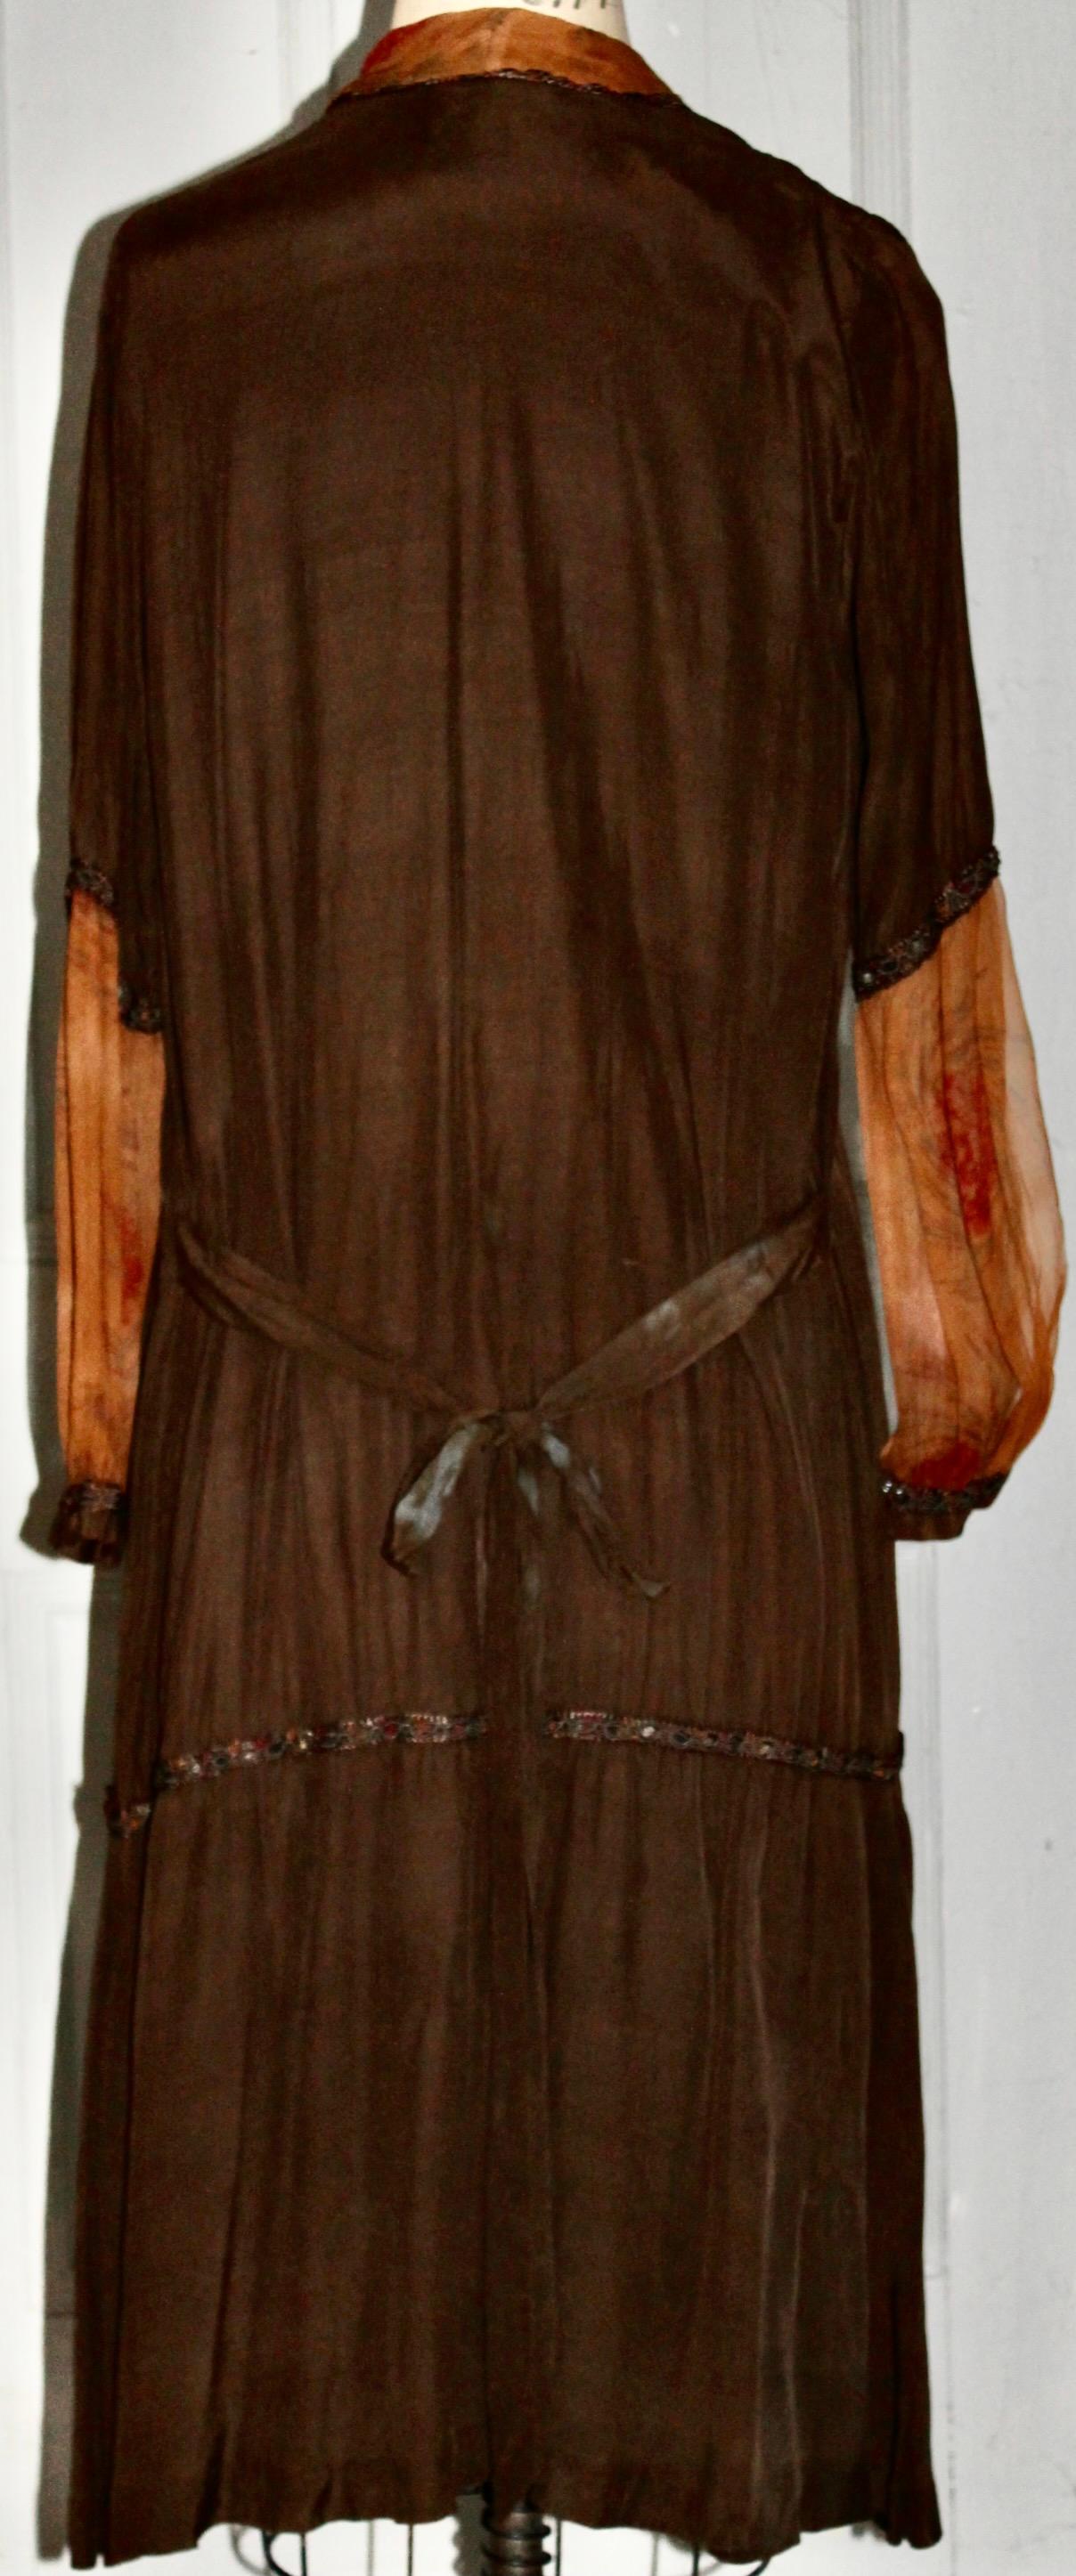 A Cinnamon and Pumpkin French 'Flapper' Cocktail Dress and Hat In Good Condition For Sale In Sharon, CT